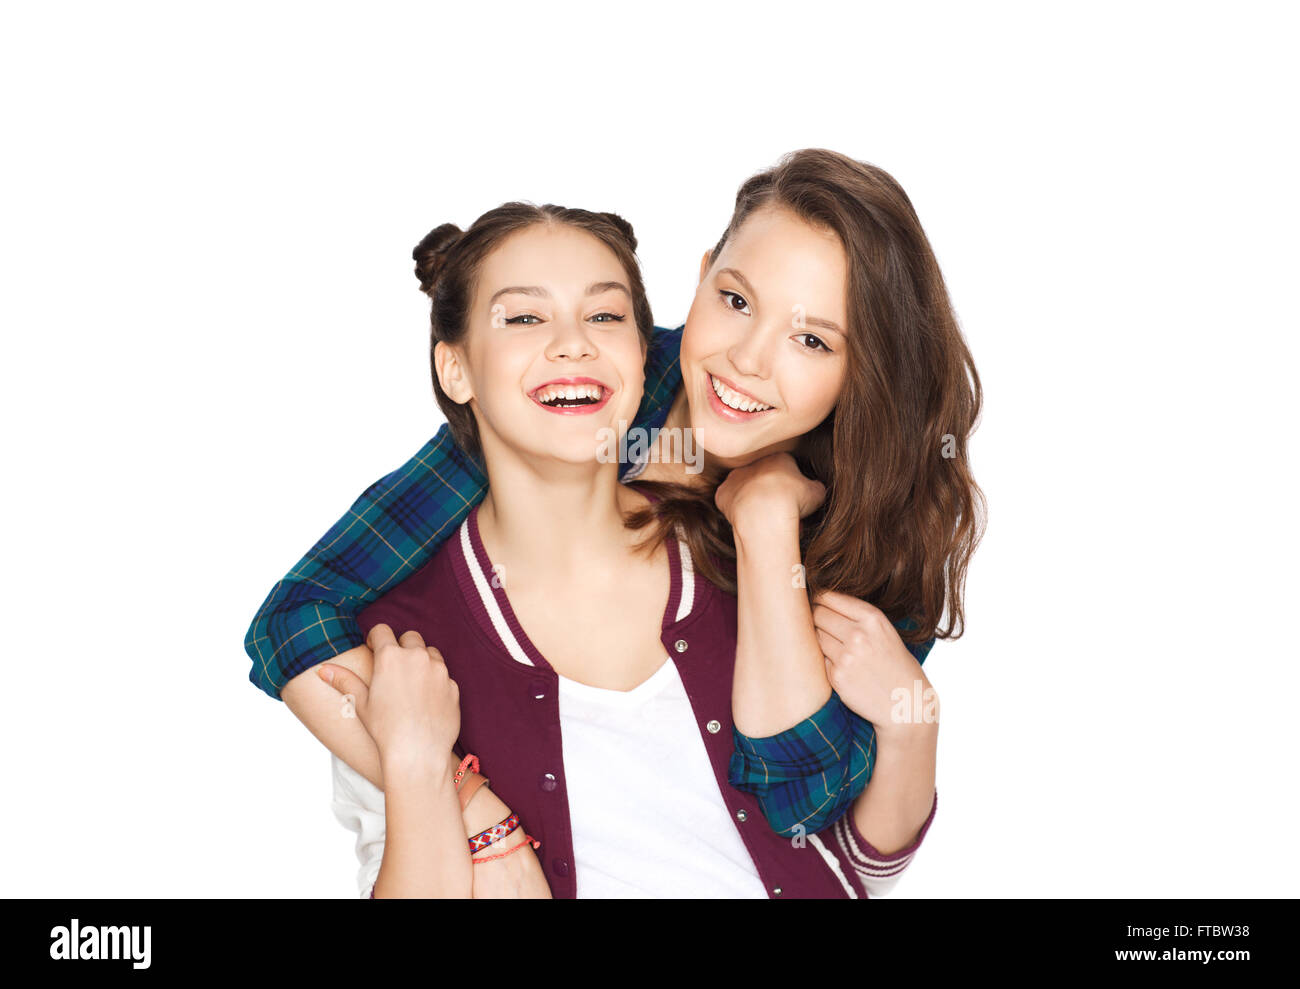 Happy smiling pretty teenage girls hugging Banque D'Images